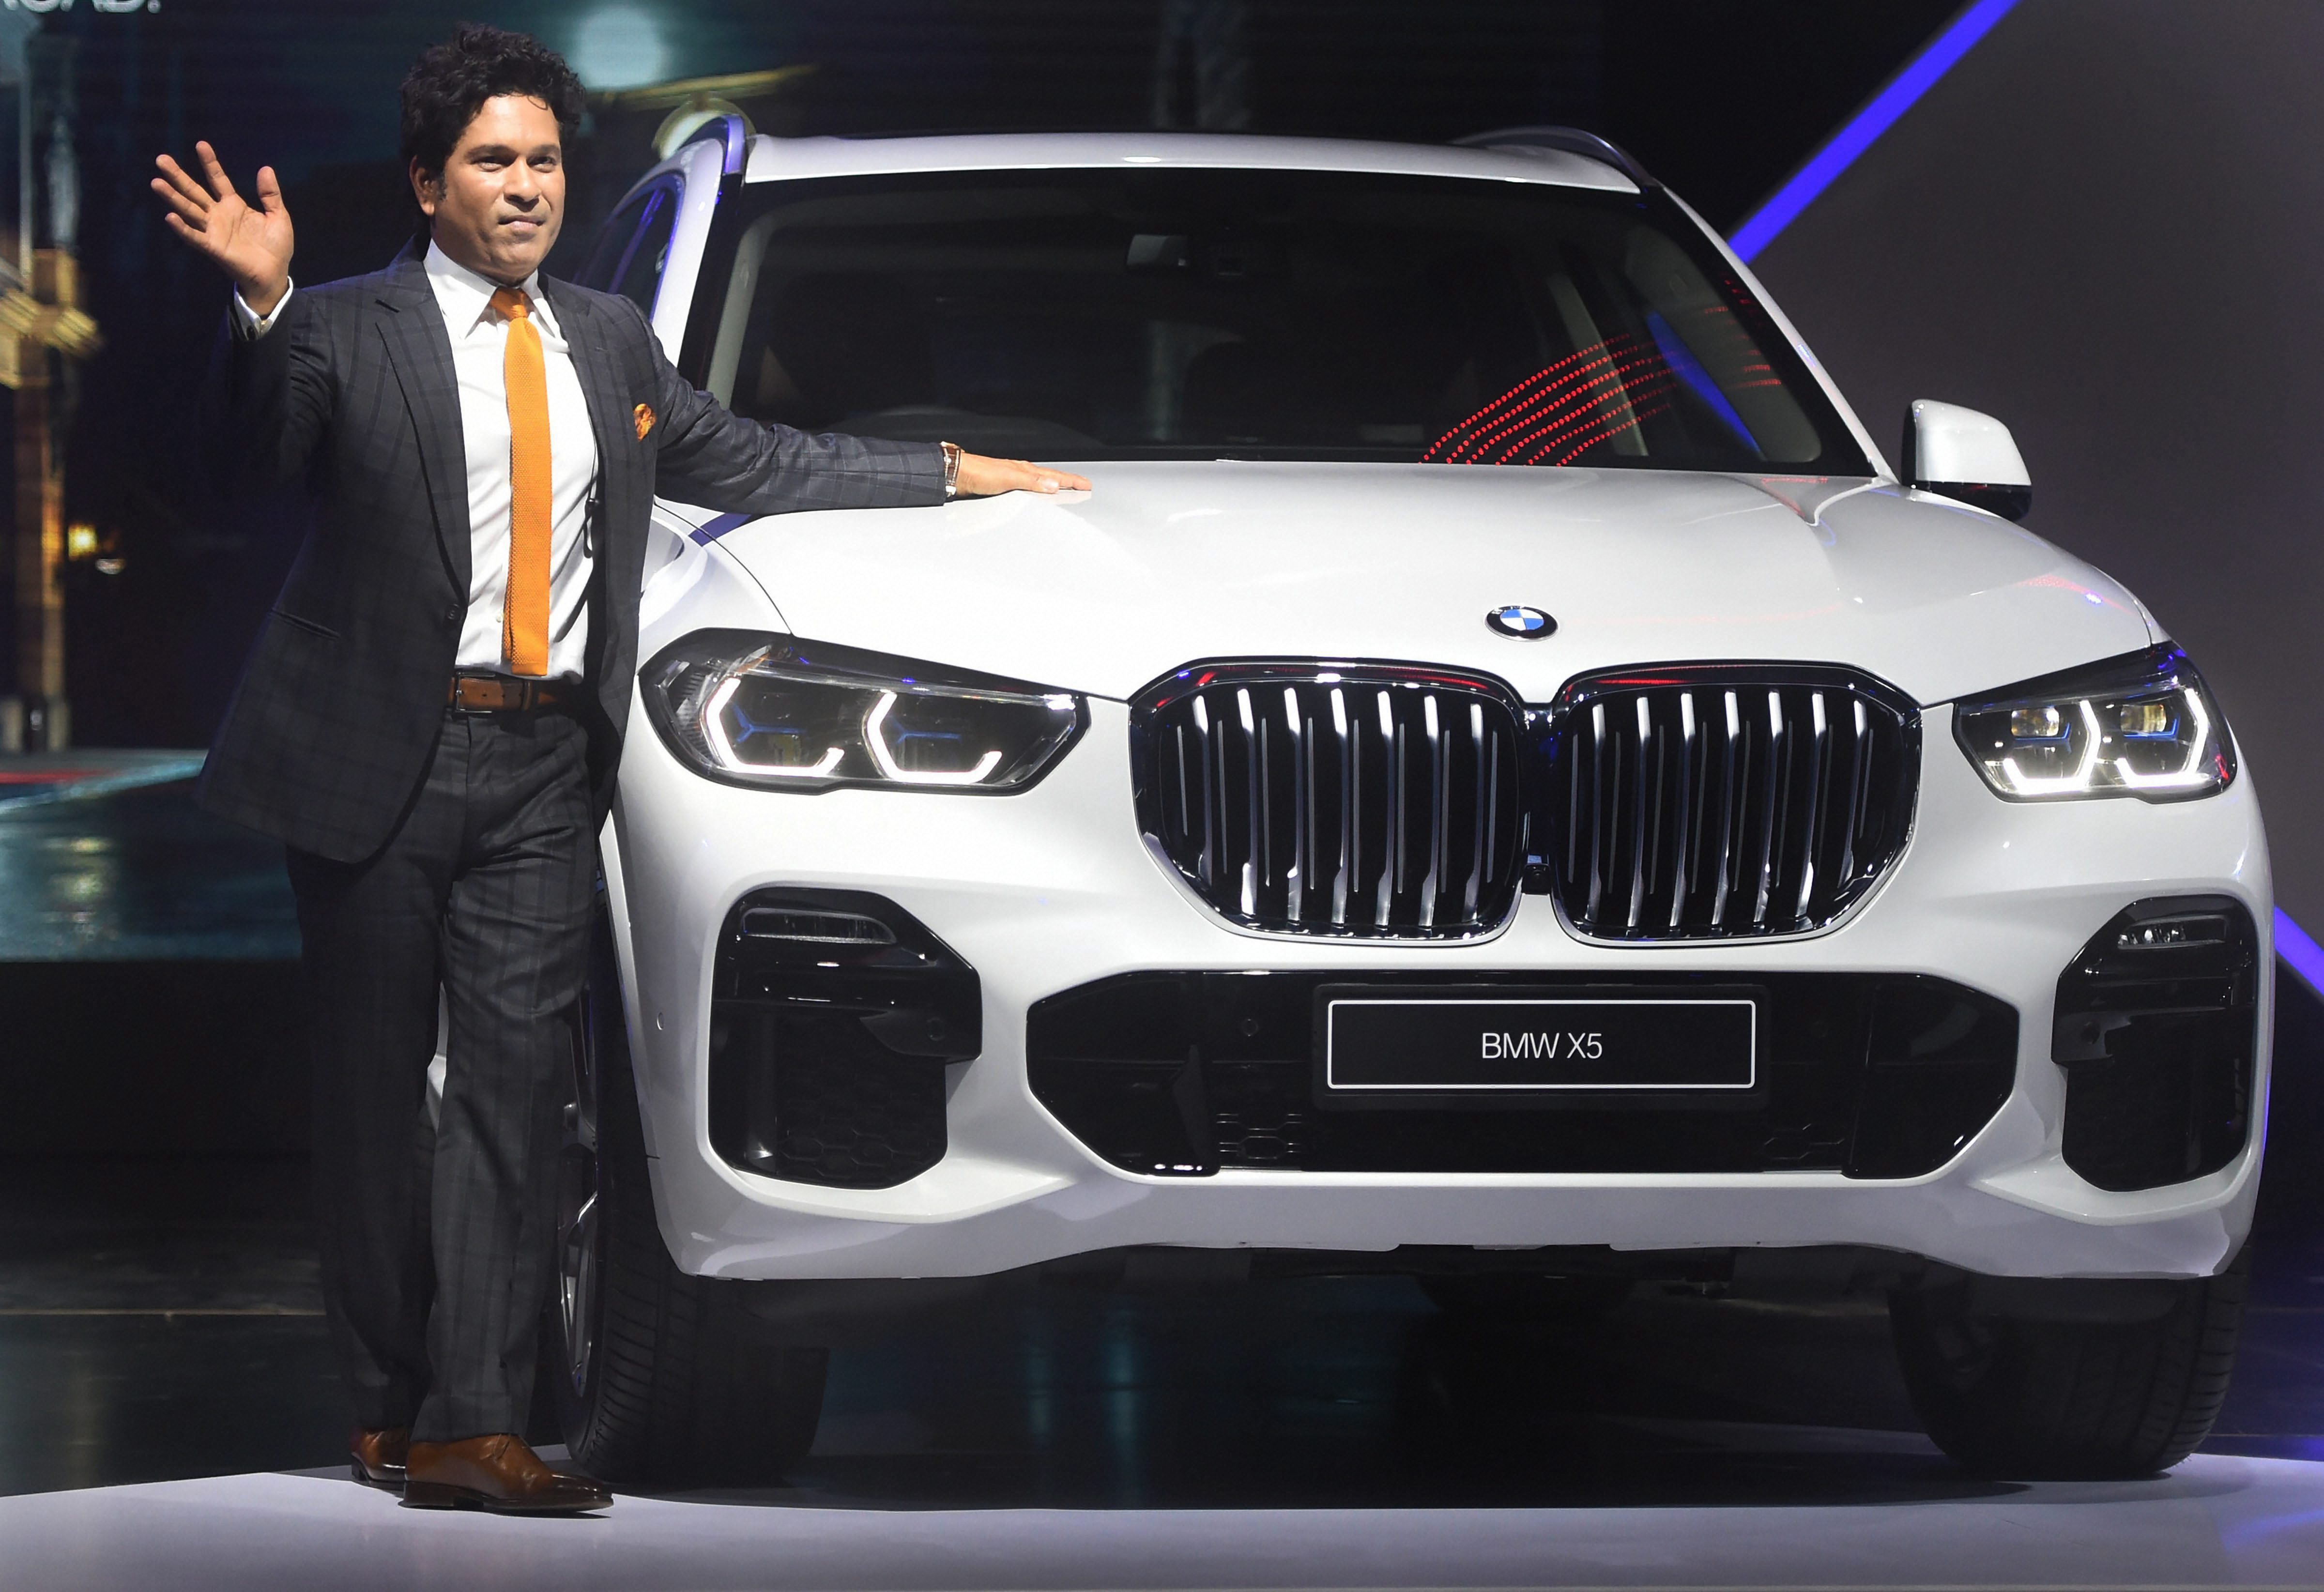 BMW launches new X5 SUV in India, prices start at Rs 72.9 lakh